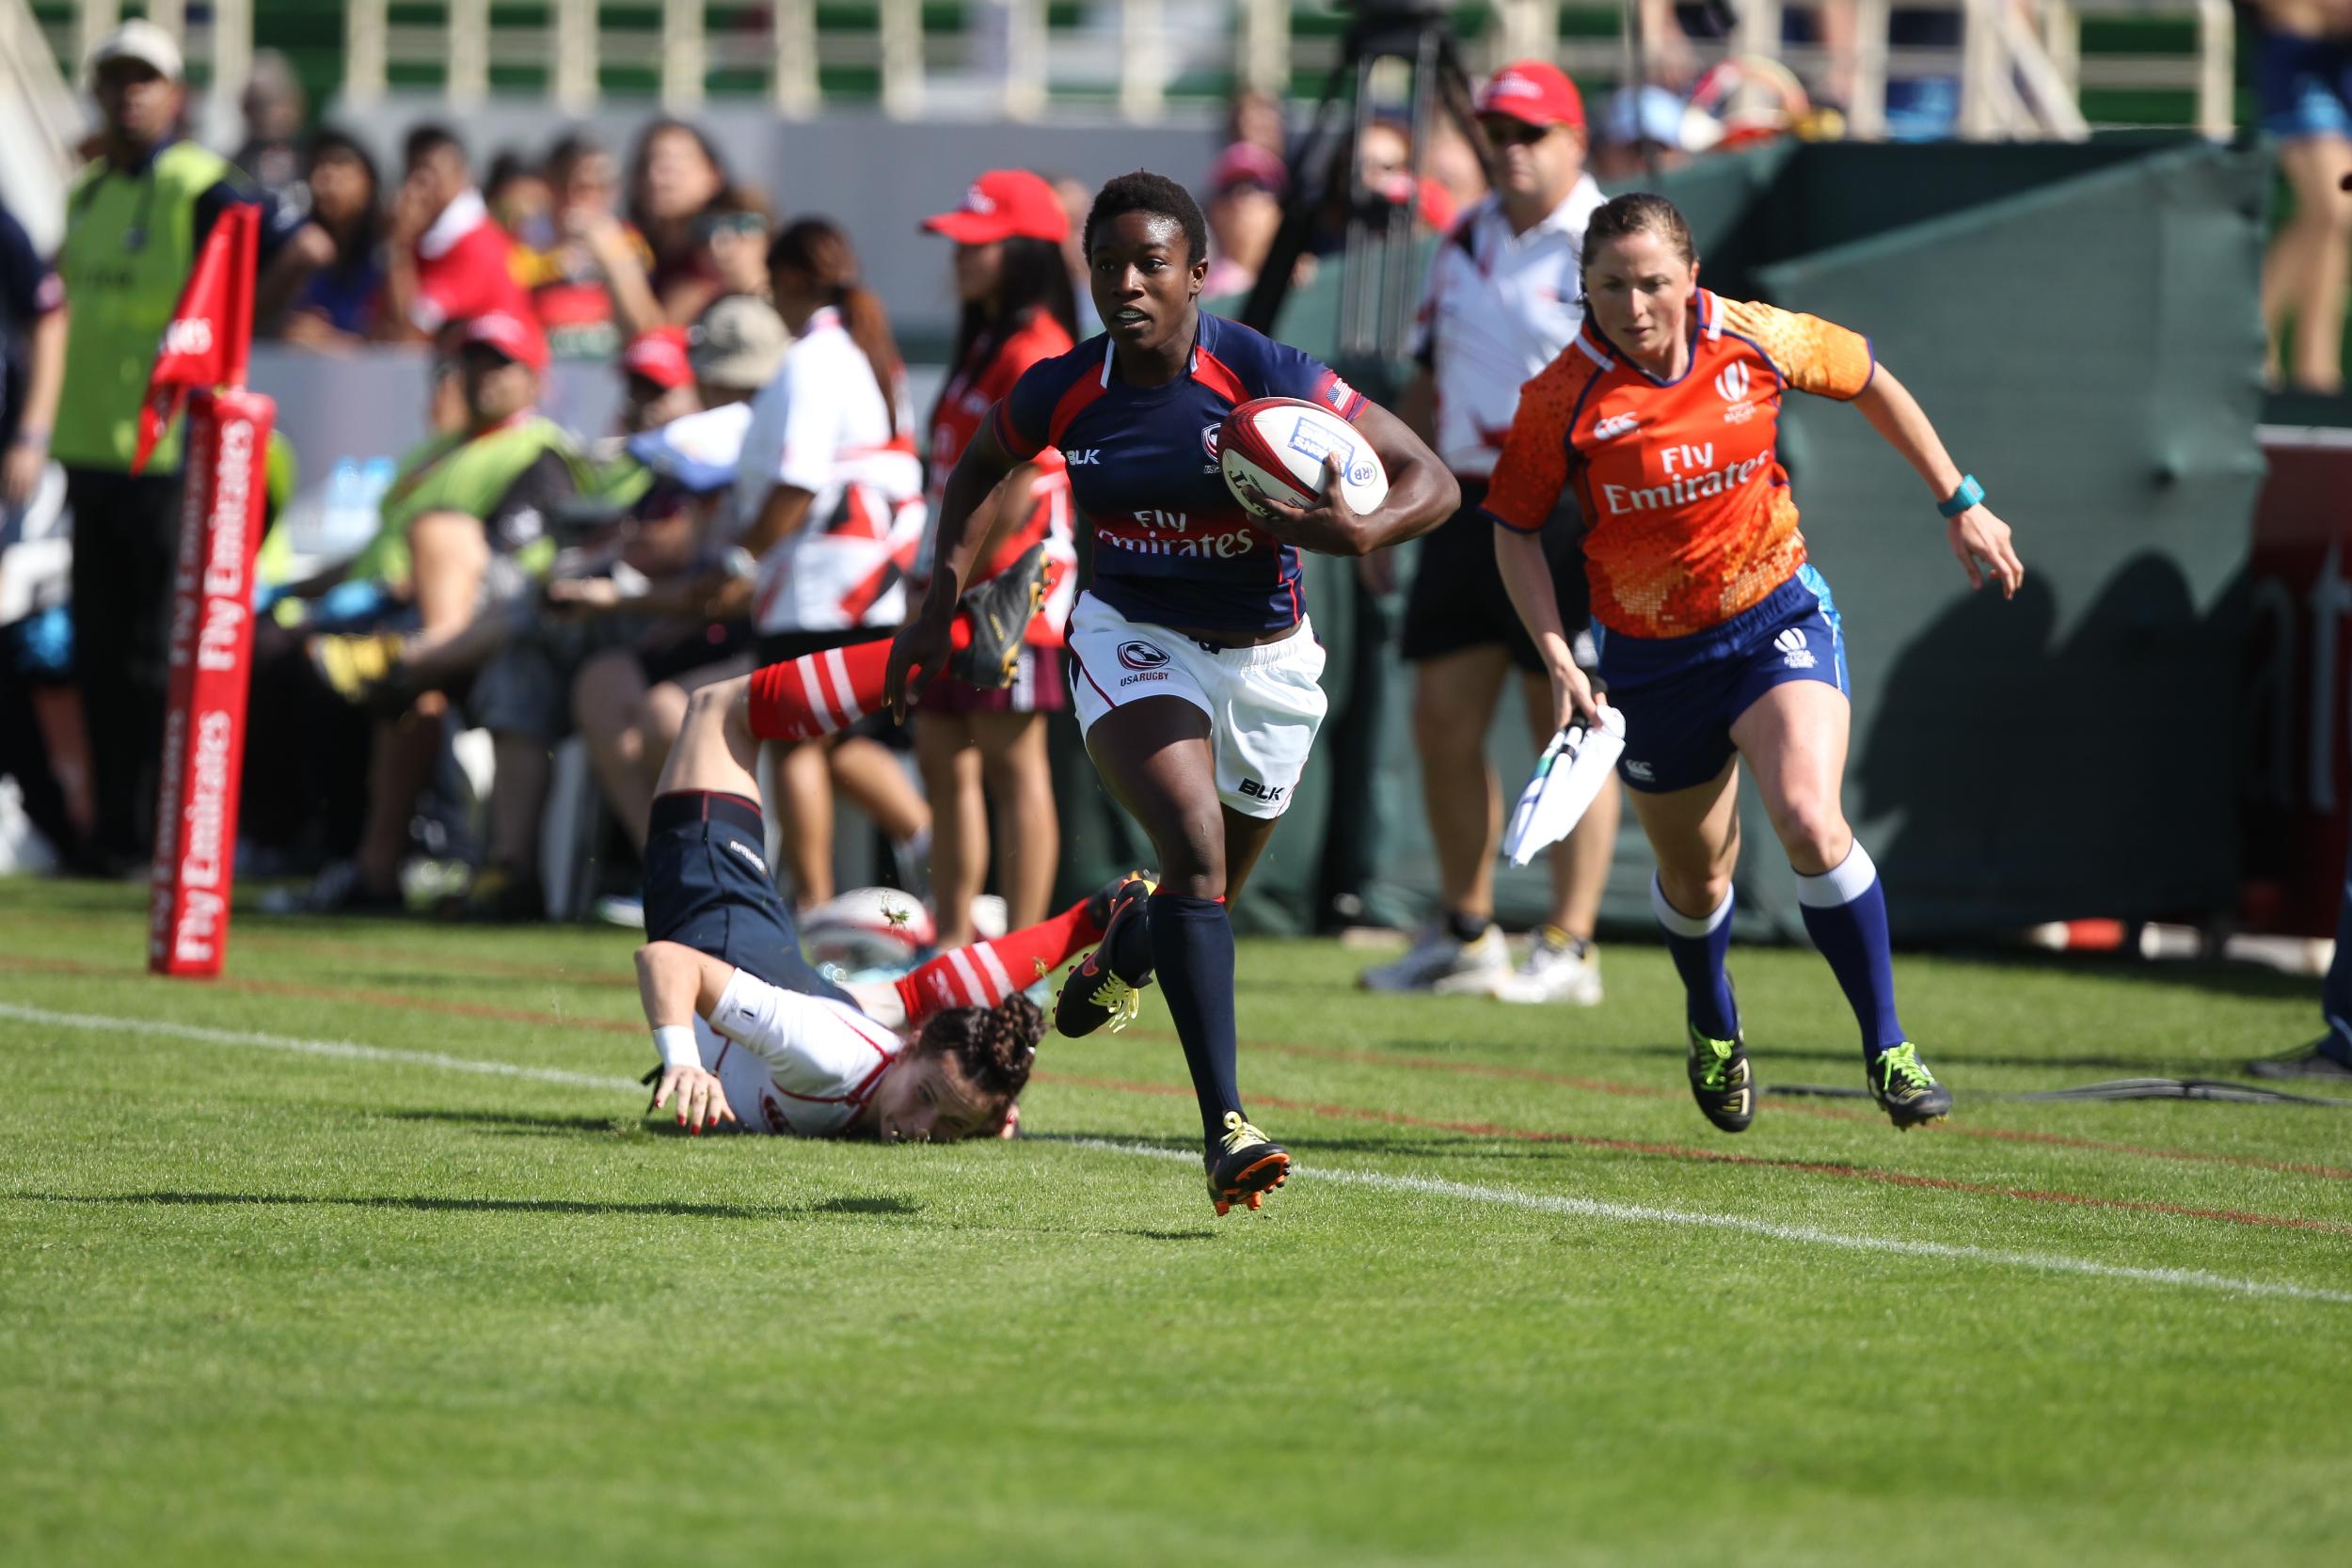 America's Victoria Folayan was the top scorer of the opening day of the World Rugby Women's Sevens Series in Dubai with 35 points, coming from seven tries  ©Martin Seras Lima/World Rugby